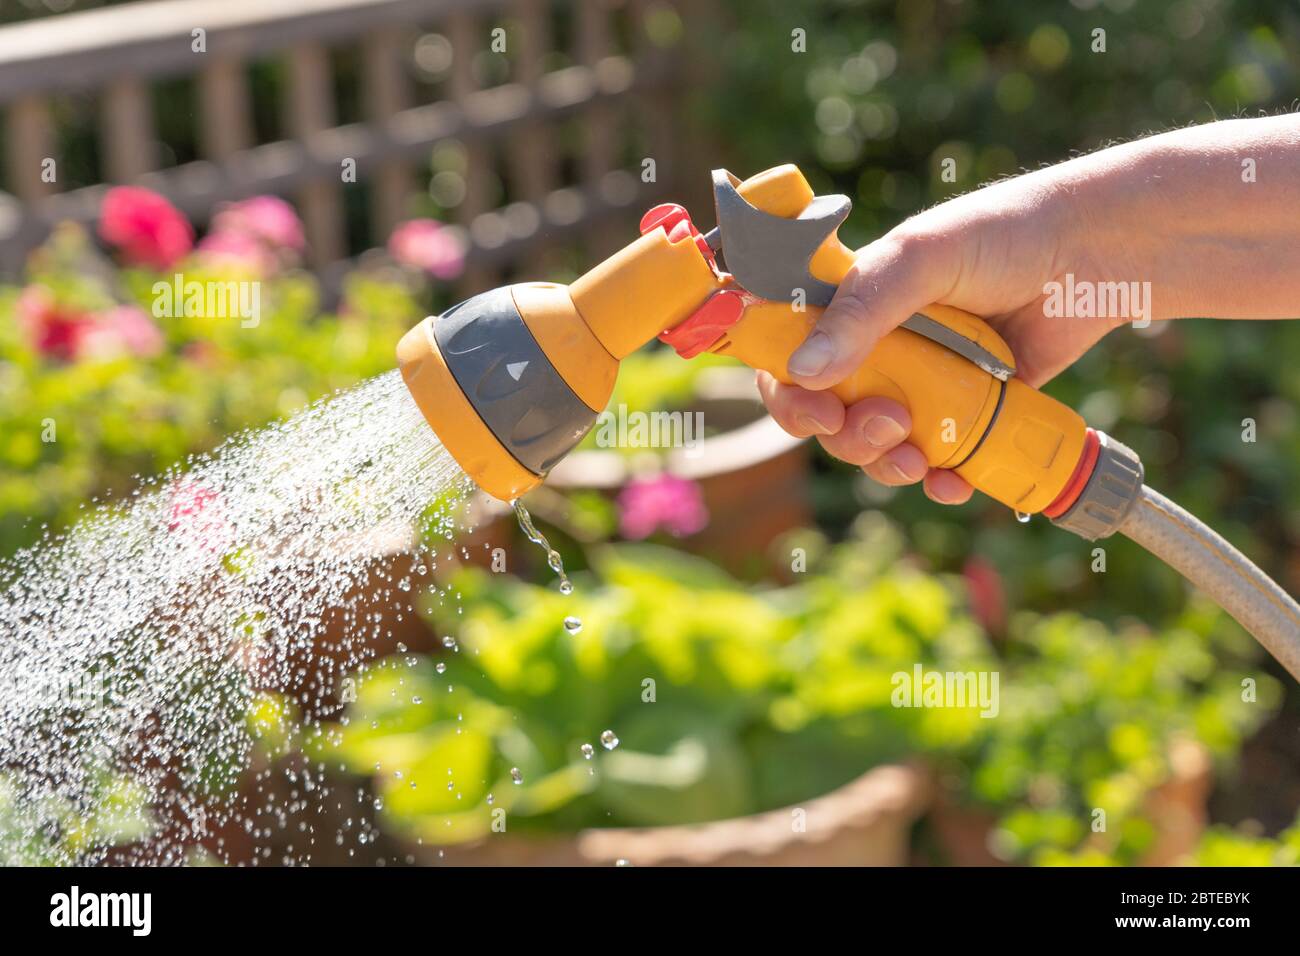 Female hand holding a watering hose spray gun watering plants in a garden. UK Stock Photo